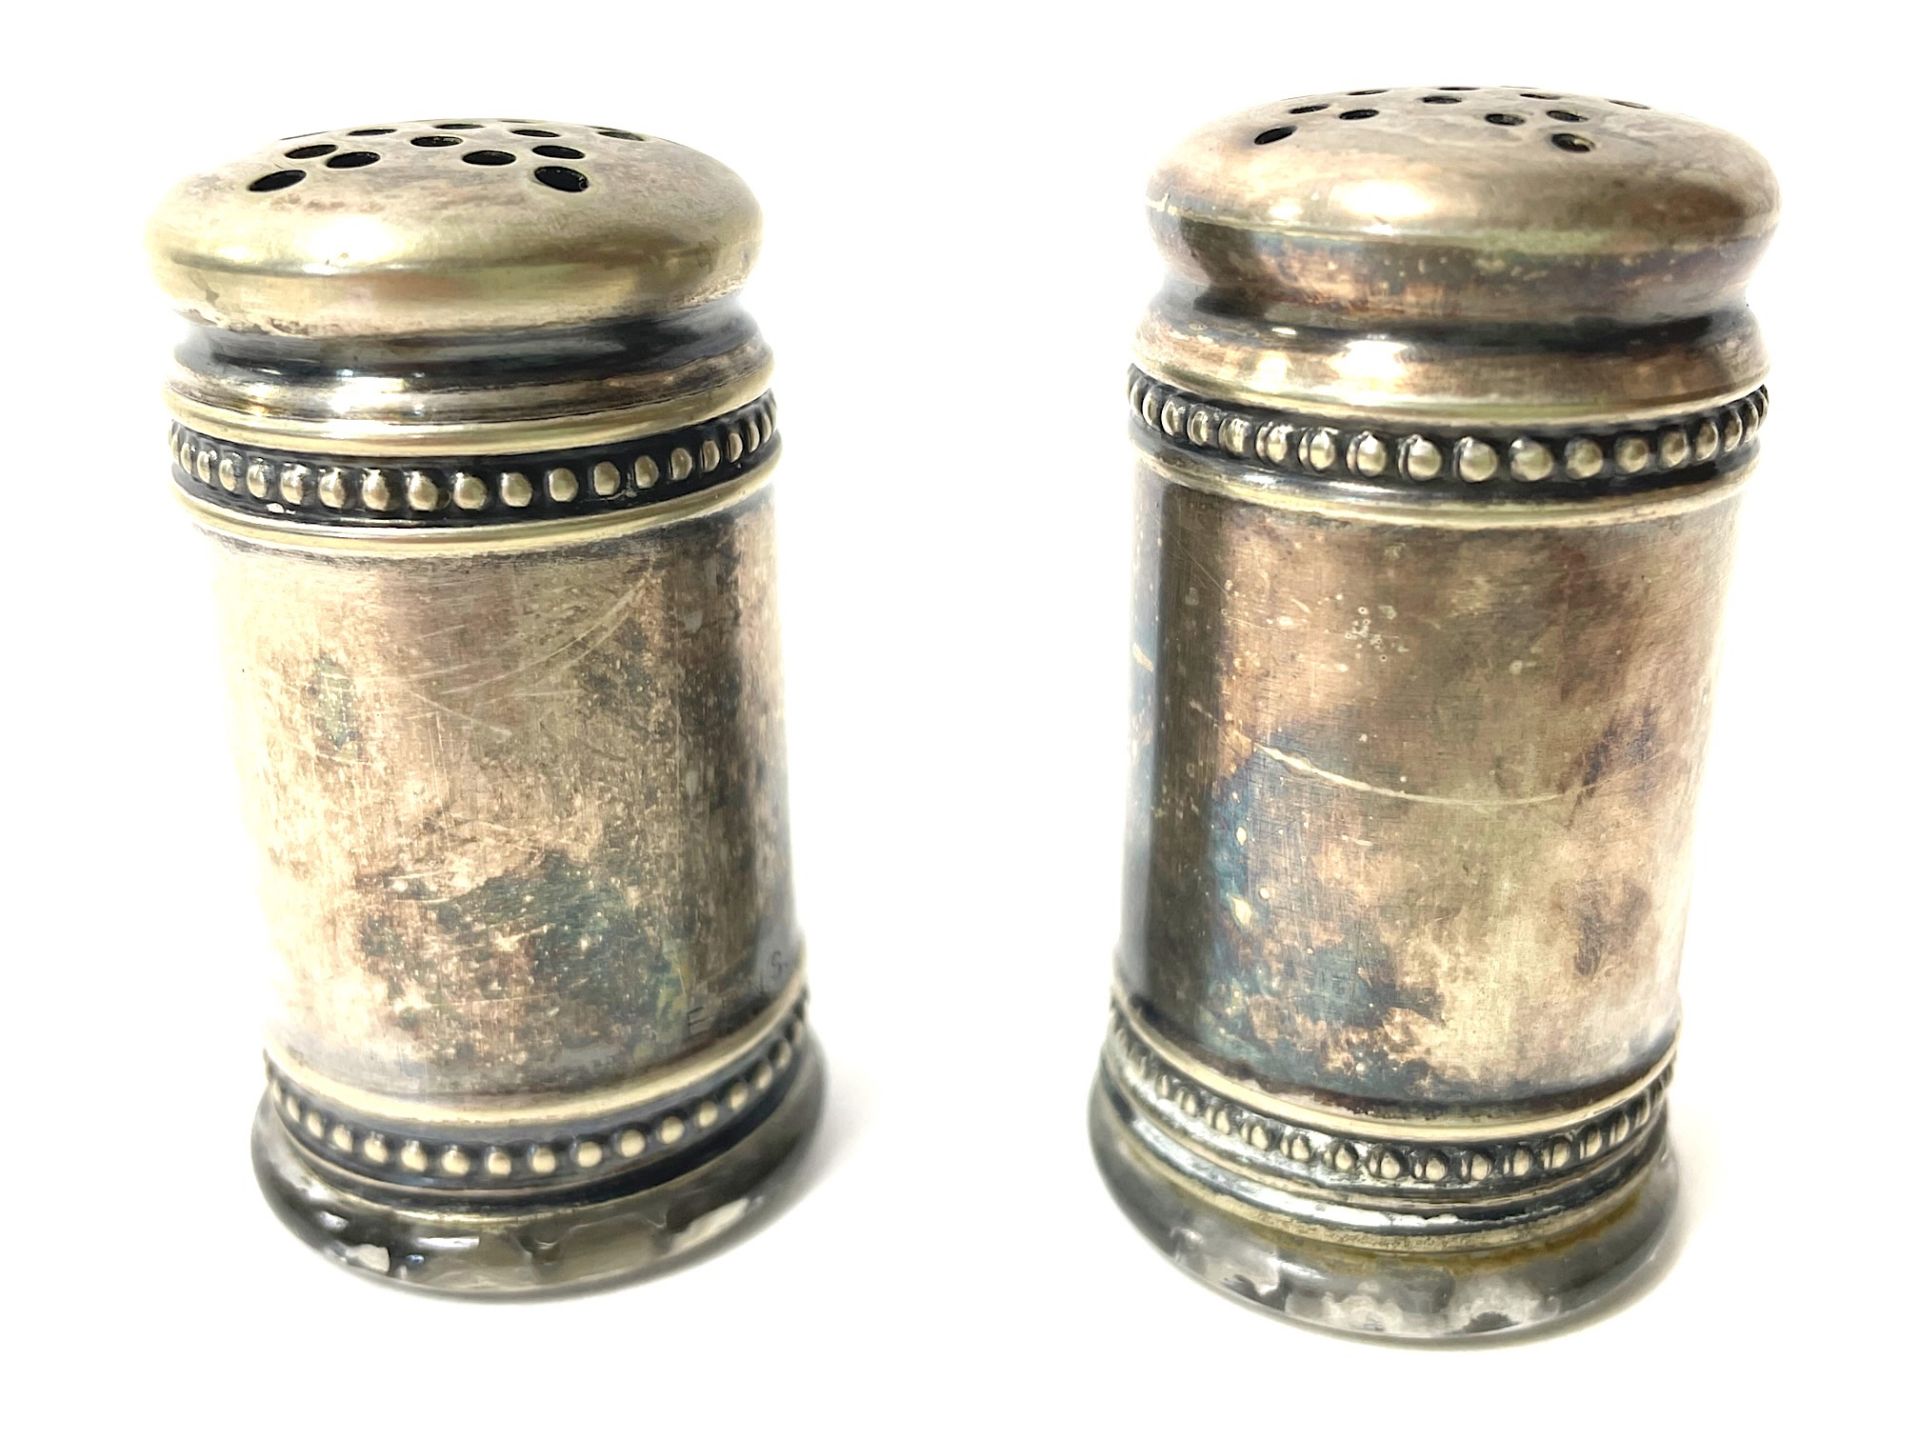 40 pairs of salt/pepper and spice shakers, - Image 7 of 88